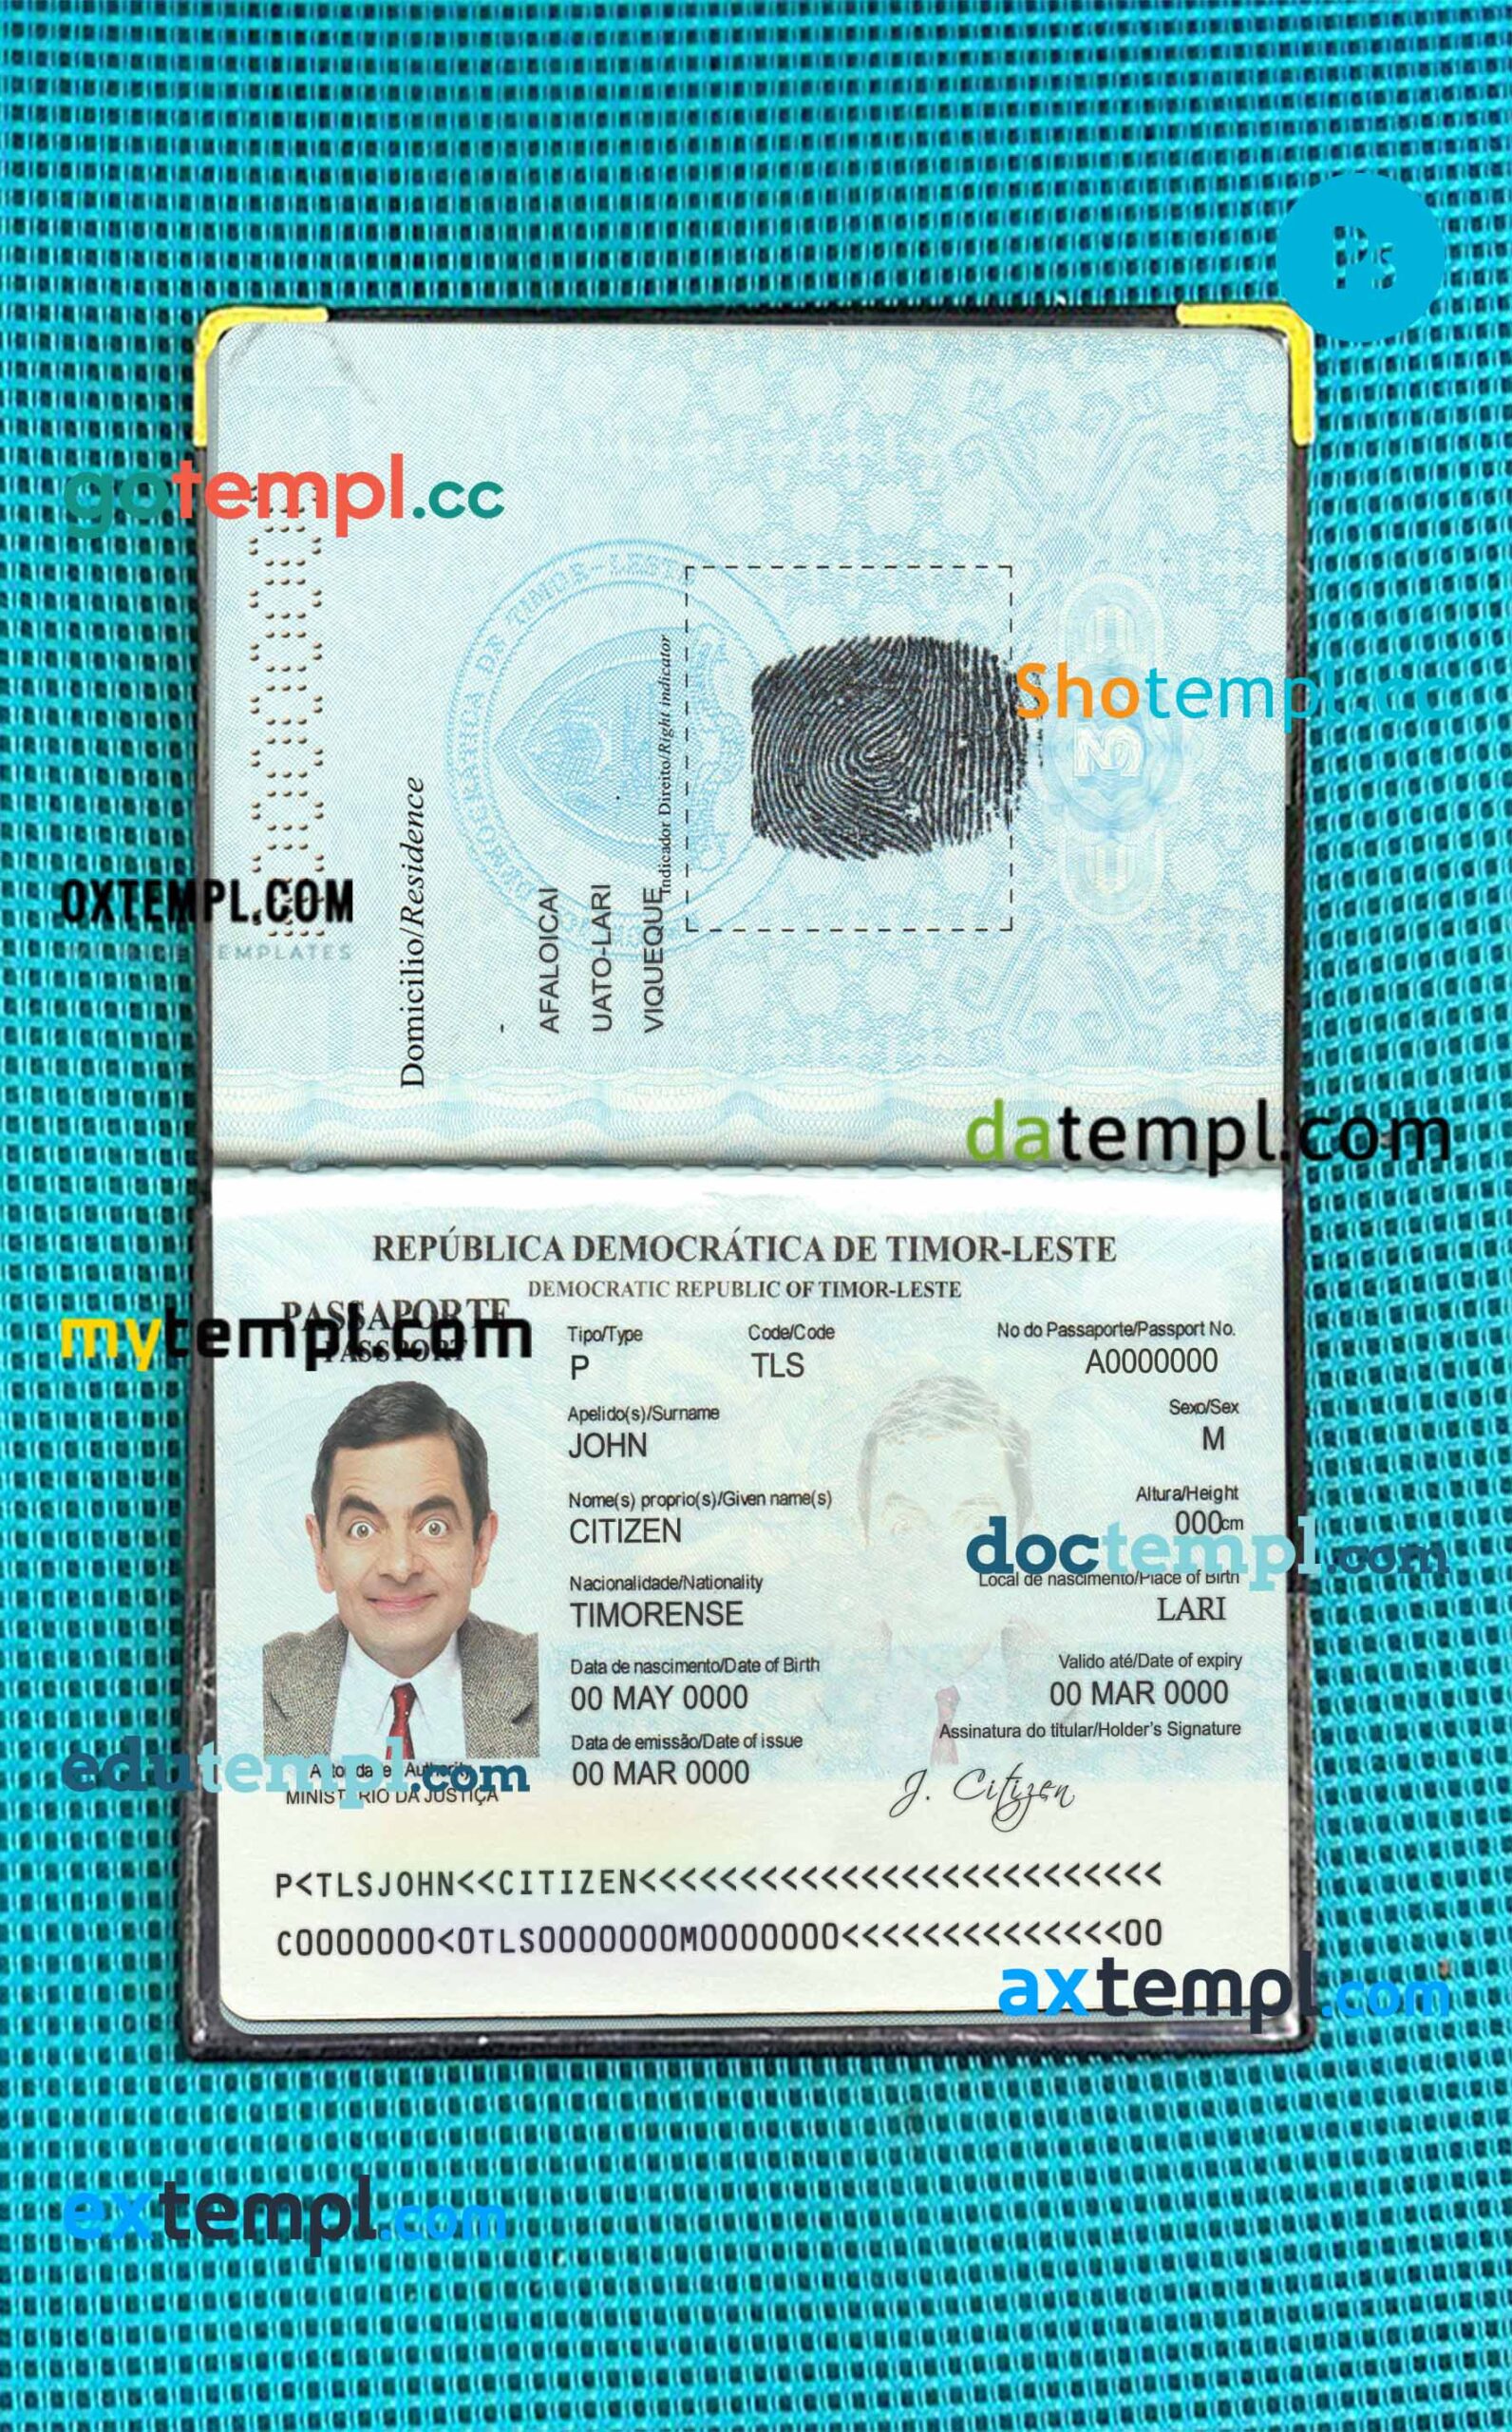 Colombia ID card editable PSDs, scan and photo-realistic snapshot, 2 in 1 (2010-2020)